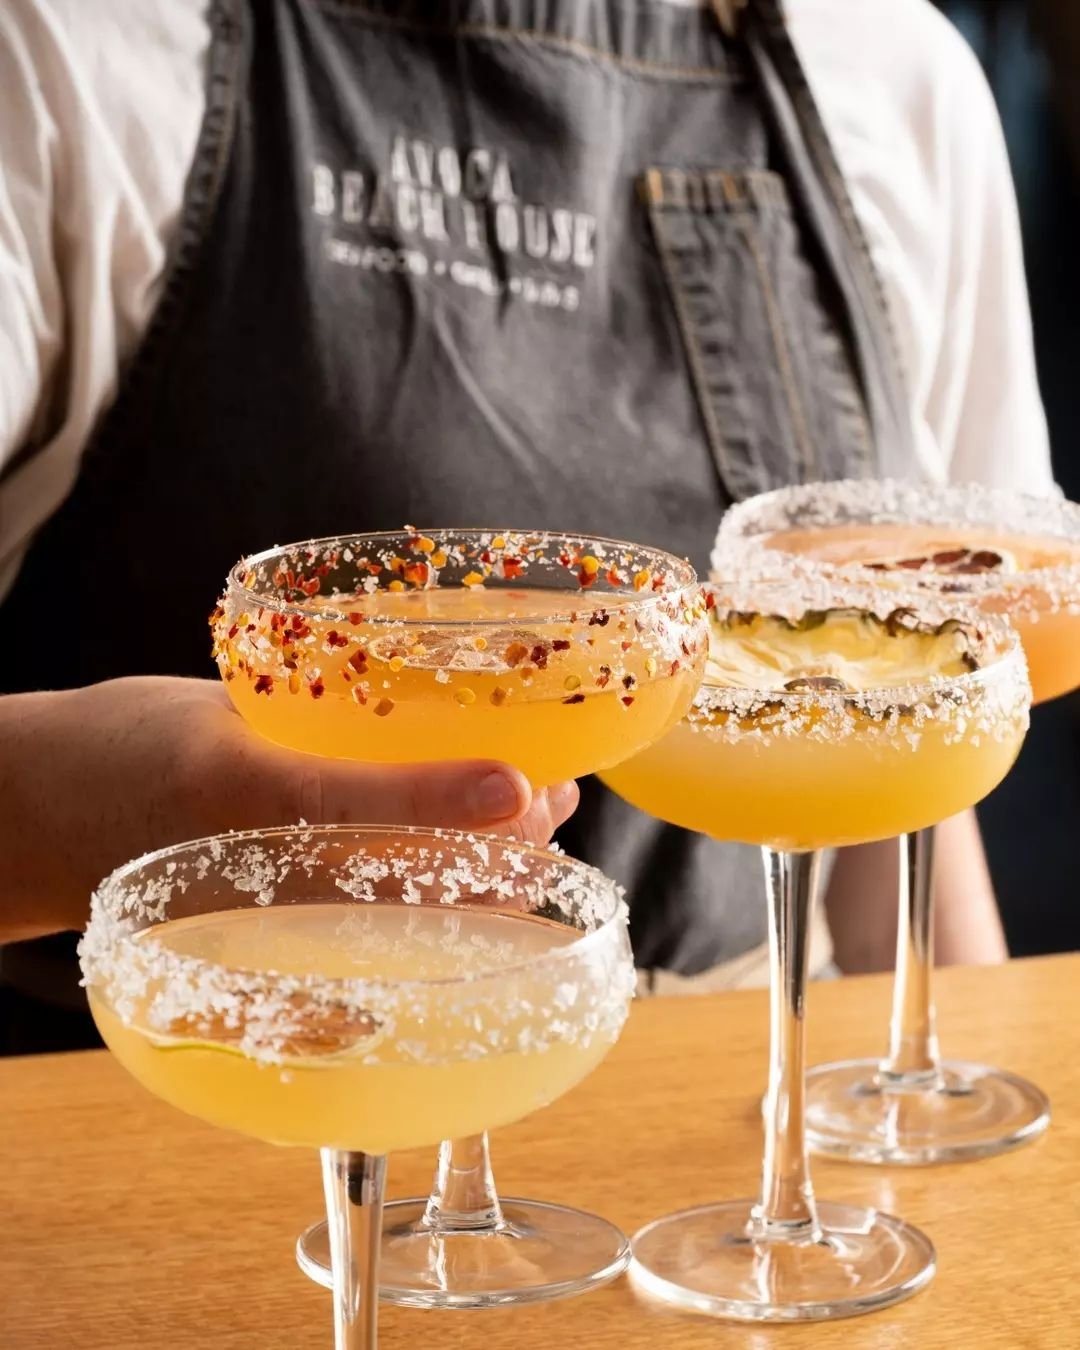 Time for margarita at our Sundown Sessions 🥃

Join us for happy hour Sunday to Thursday between 4:30pm and 5:30 pm!

With $6 tap beers, $9 house wines, $14 for select large wines and $14 happy hour cocktails. This is one special you won&rsquo;t want